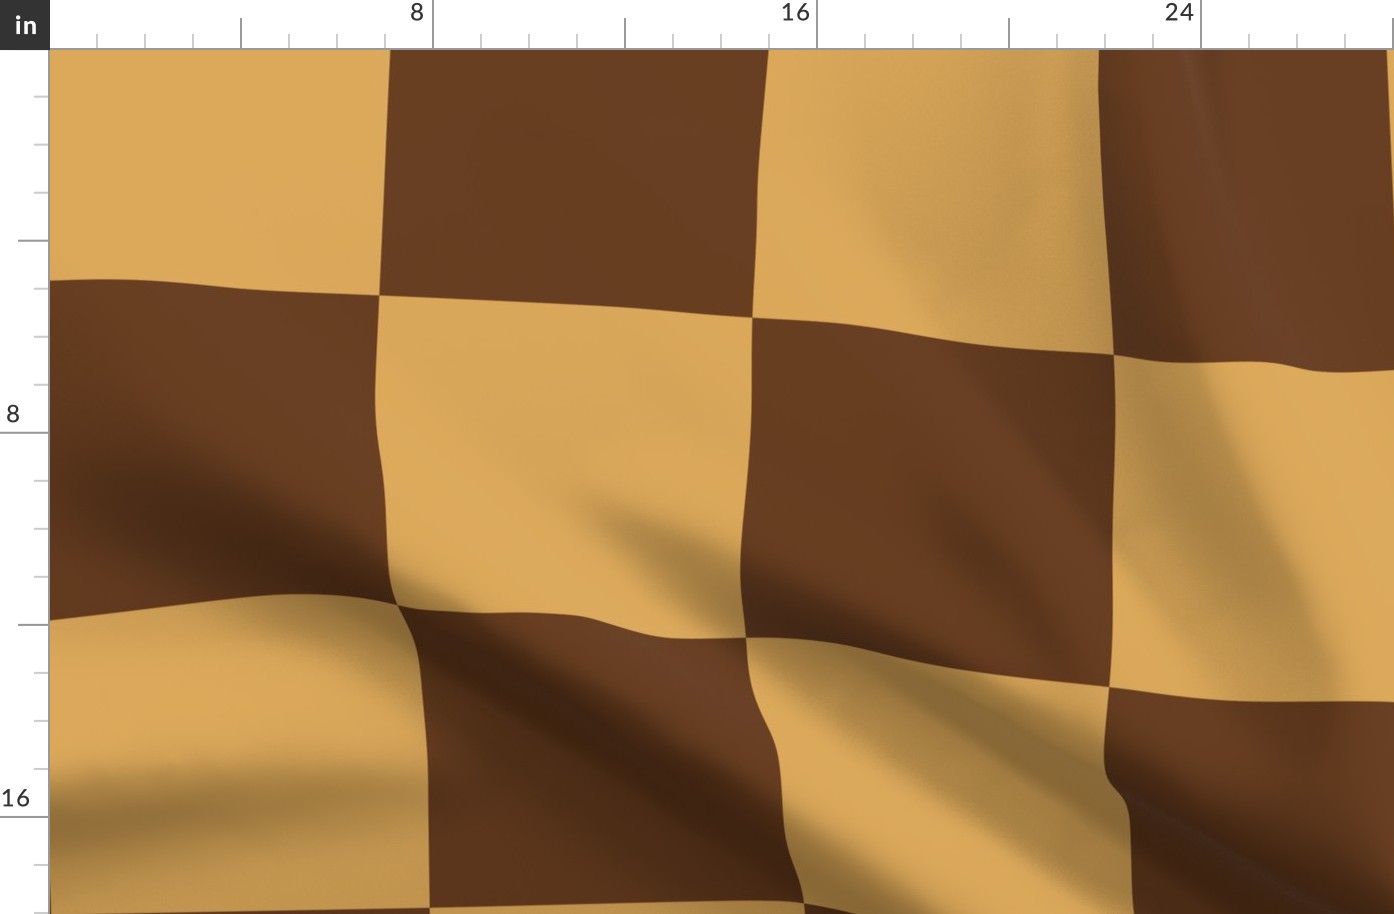 JP22 - Cheater Quilt Checkerboard in Seven Inch Squares of Golden Brown and Butterscotch Tan